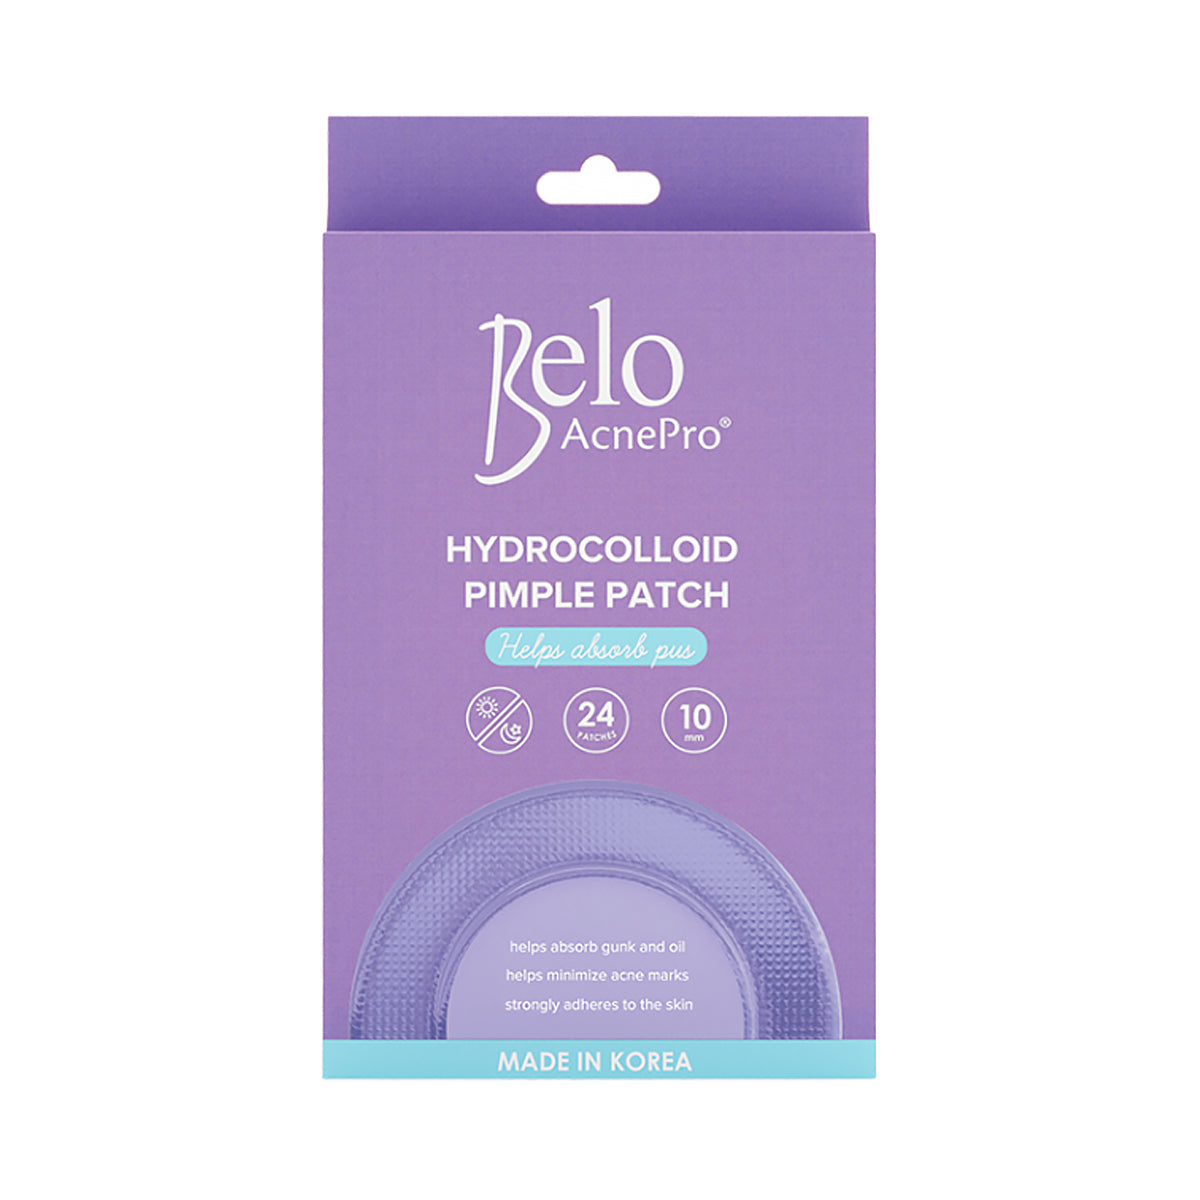 Belo AcnePro Hydrocolloid Pimple Patch | Filipino Skincare Products NZ